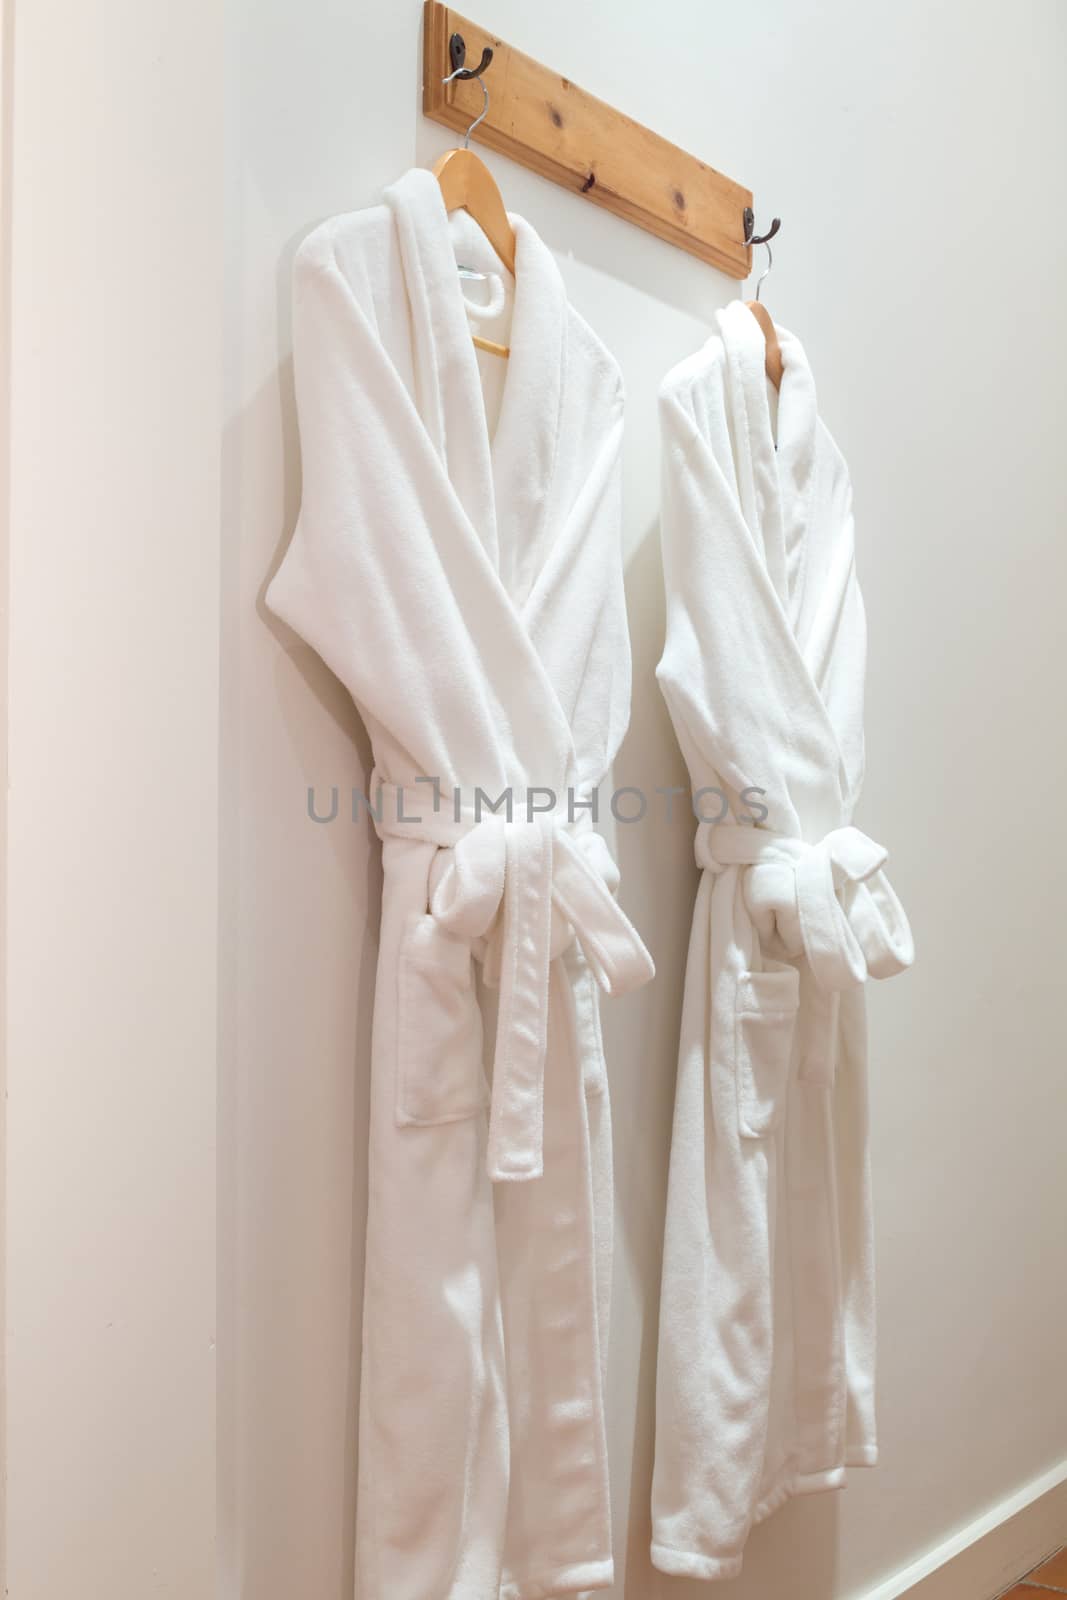 Bathrobes hanging on the wall by derejeb